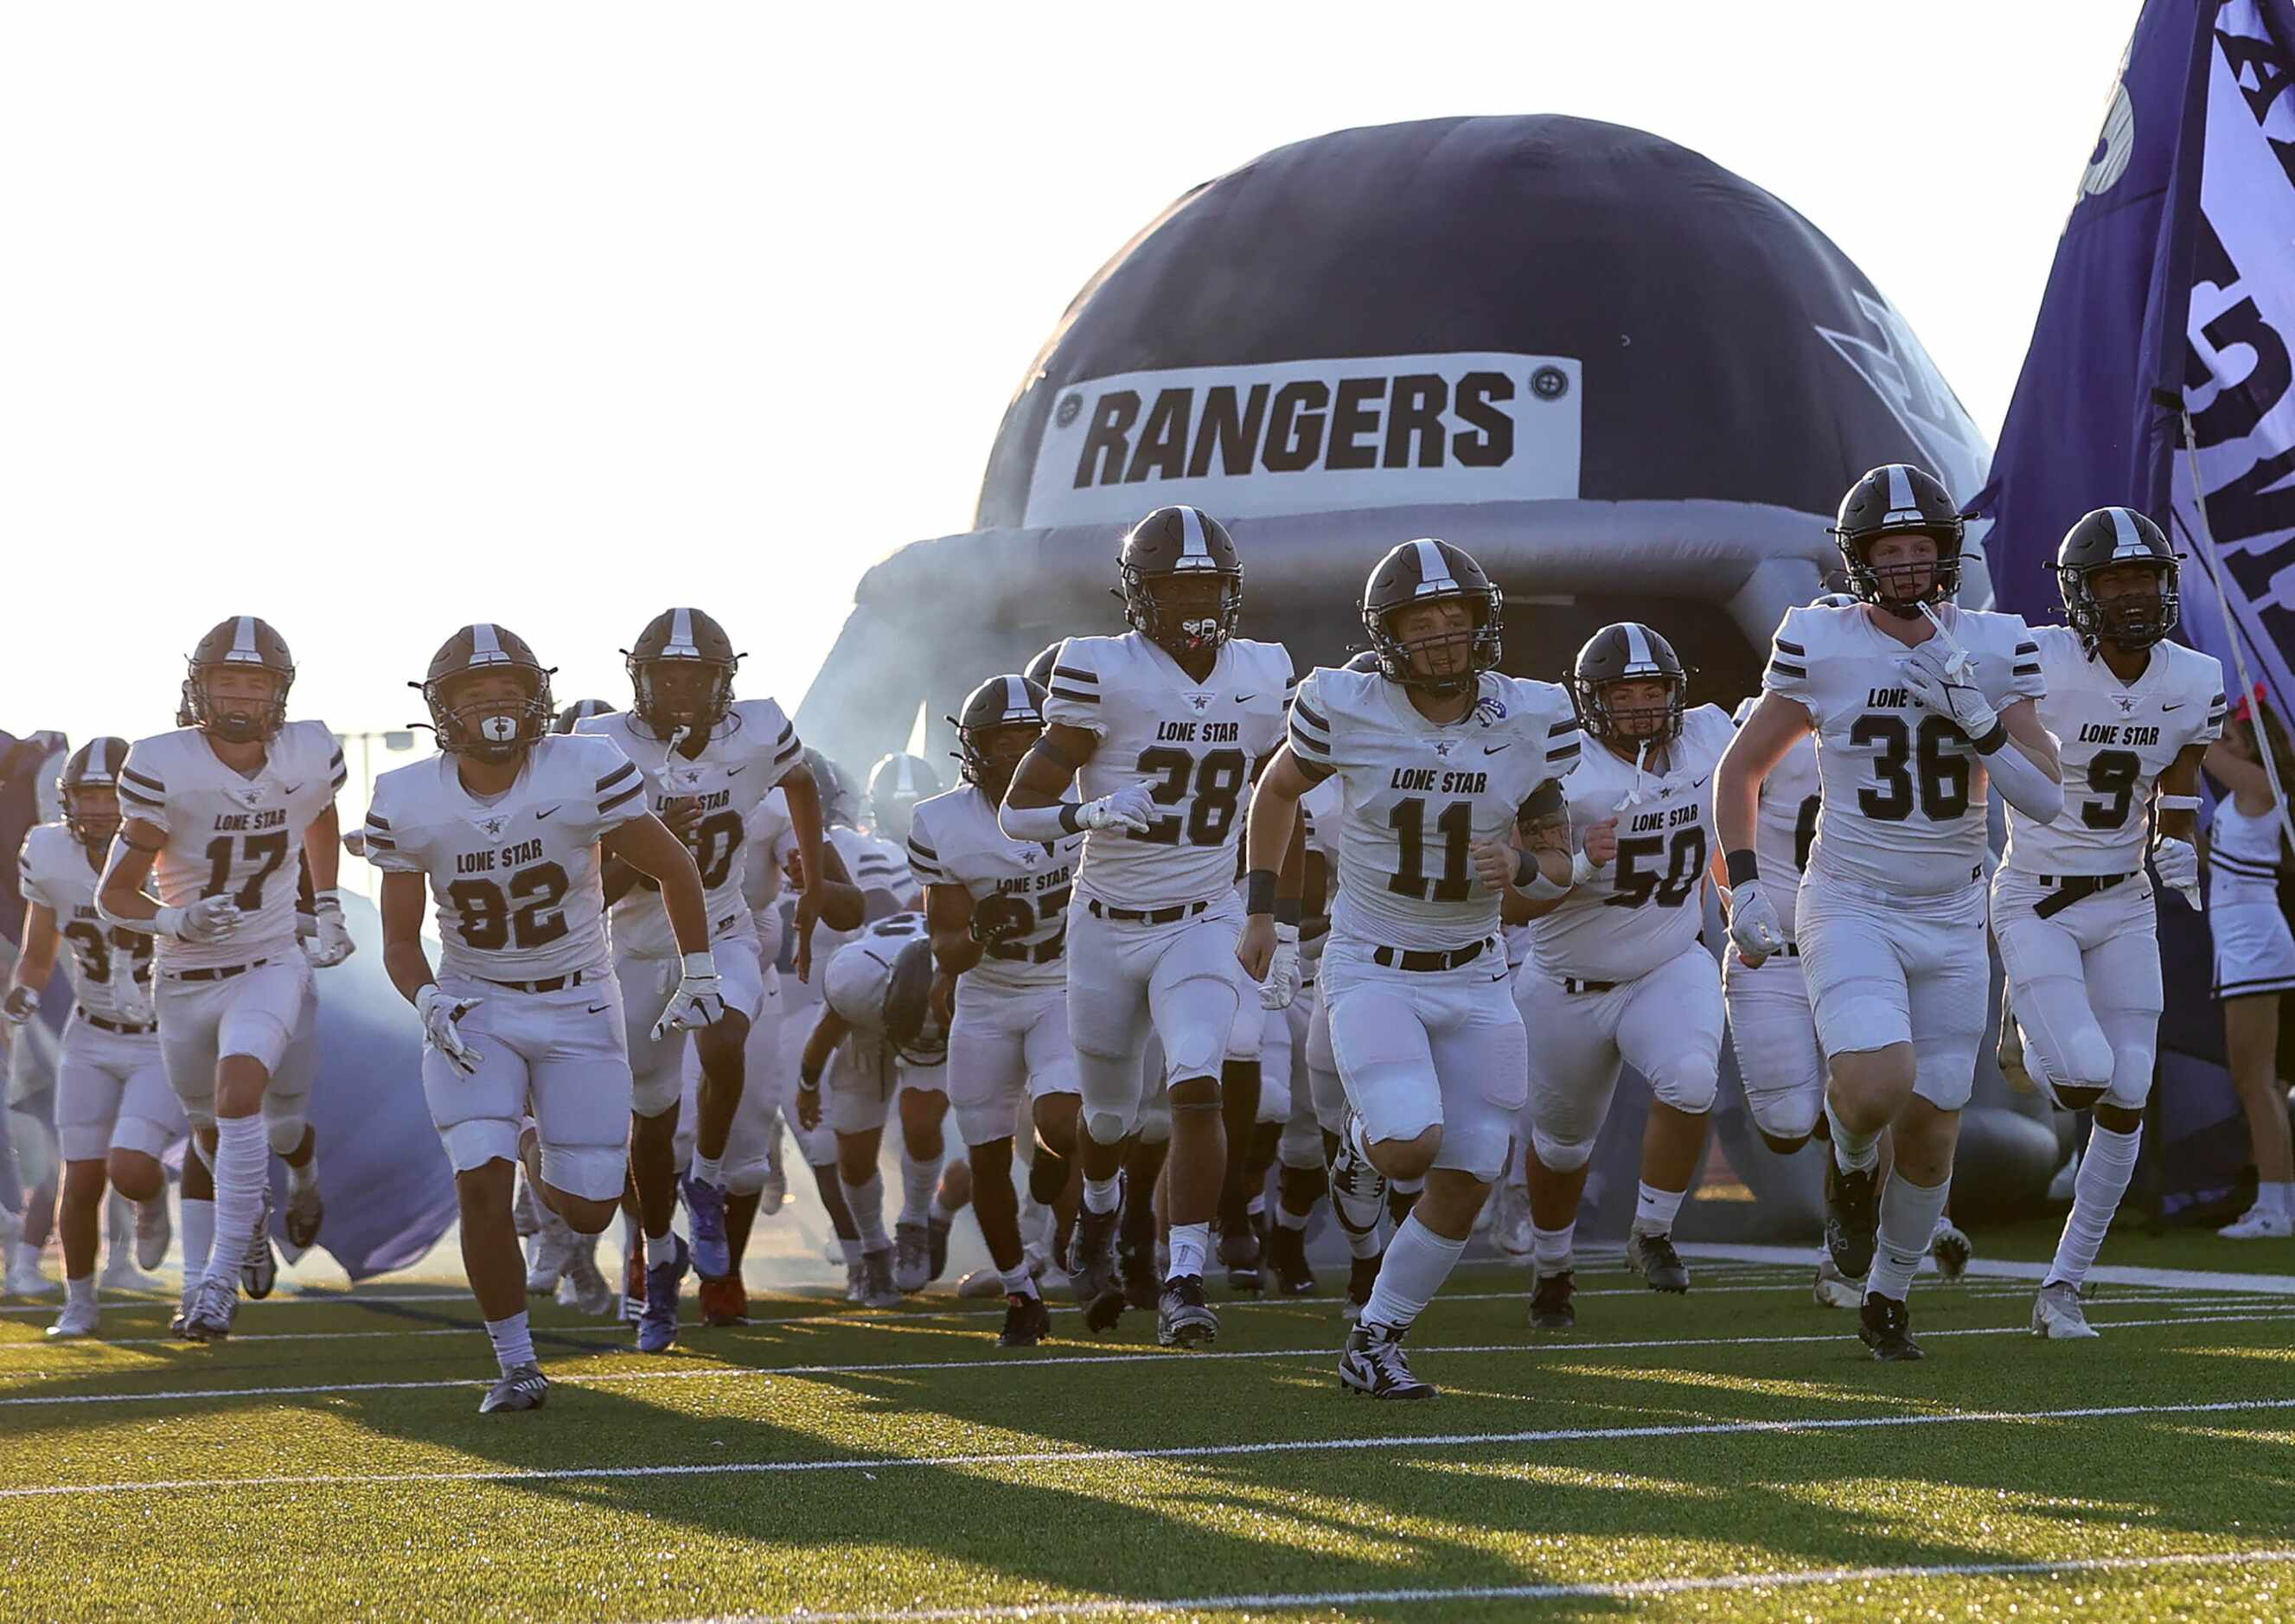 The Frisco Lone Star Rangers enter the field to face Frisco Reedy in a high school football...